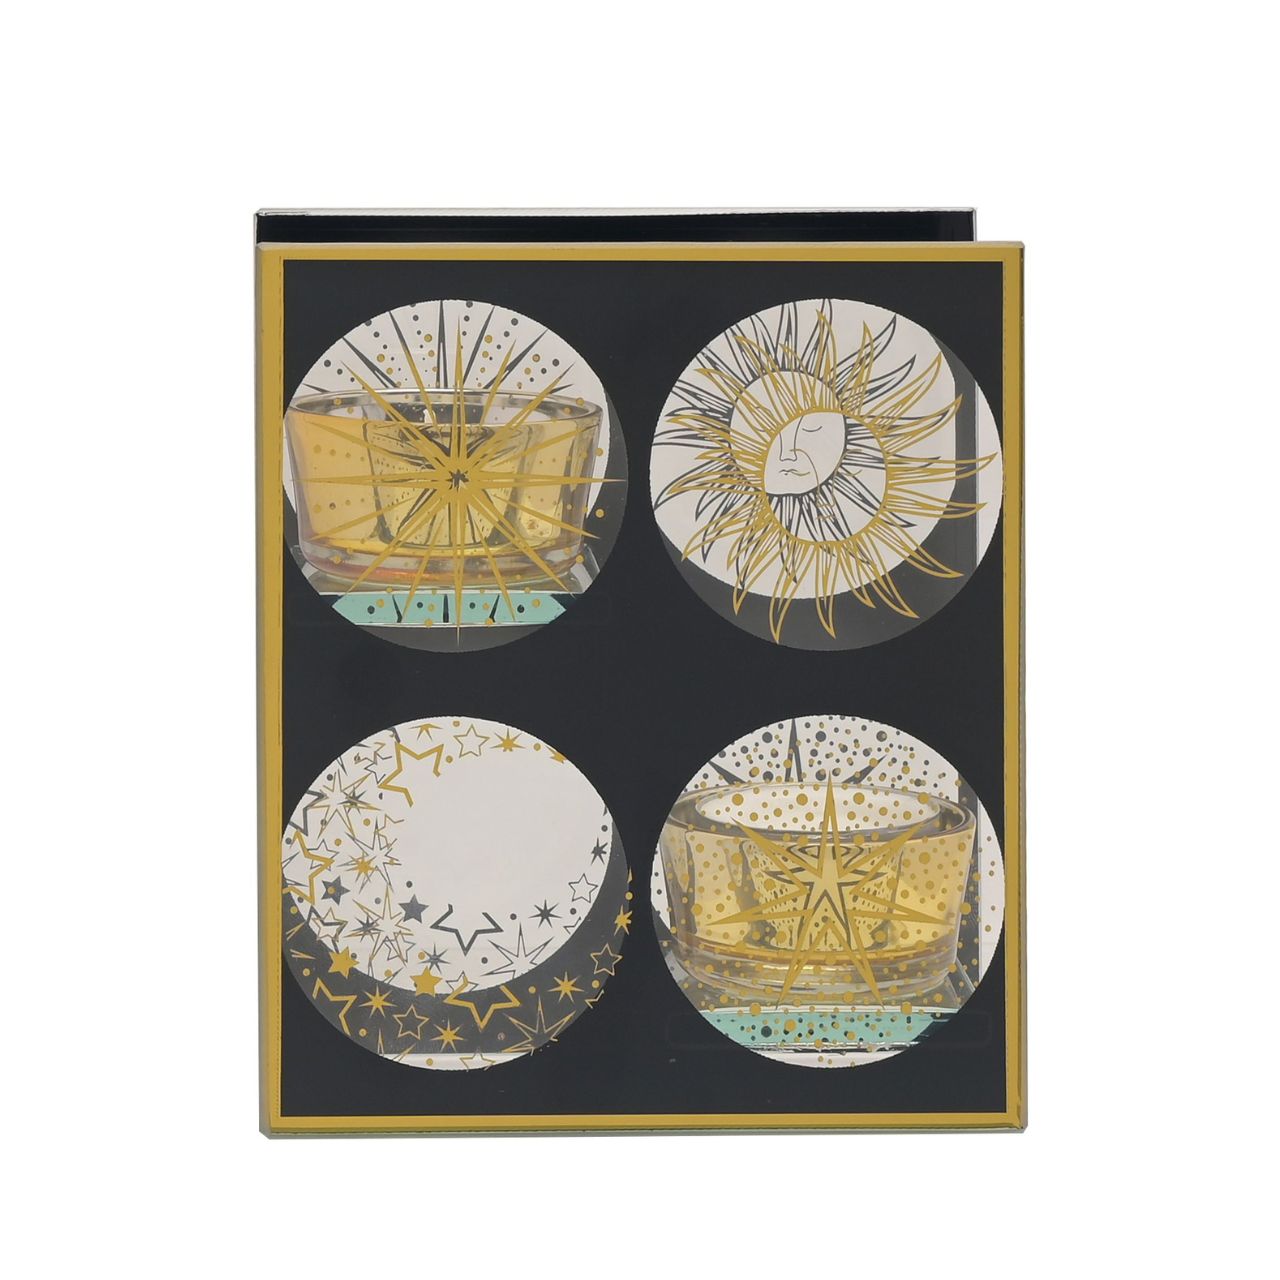 Celestial Double Tealight Holder  A celestial single glass tea light holder by THE SEASONAL GIFT CO.  This celestial tea light holder takes inspiration from the stars as it shines brightly for all to admire.